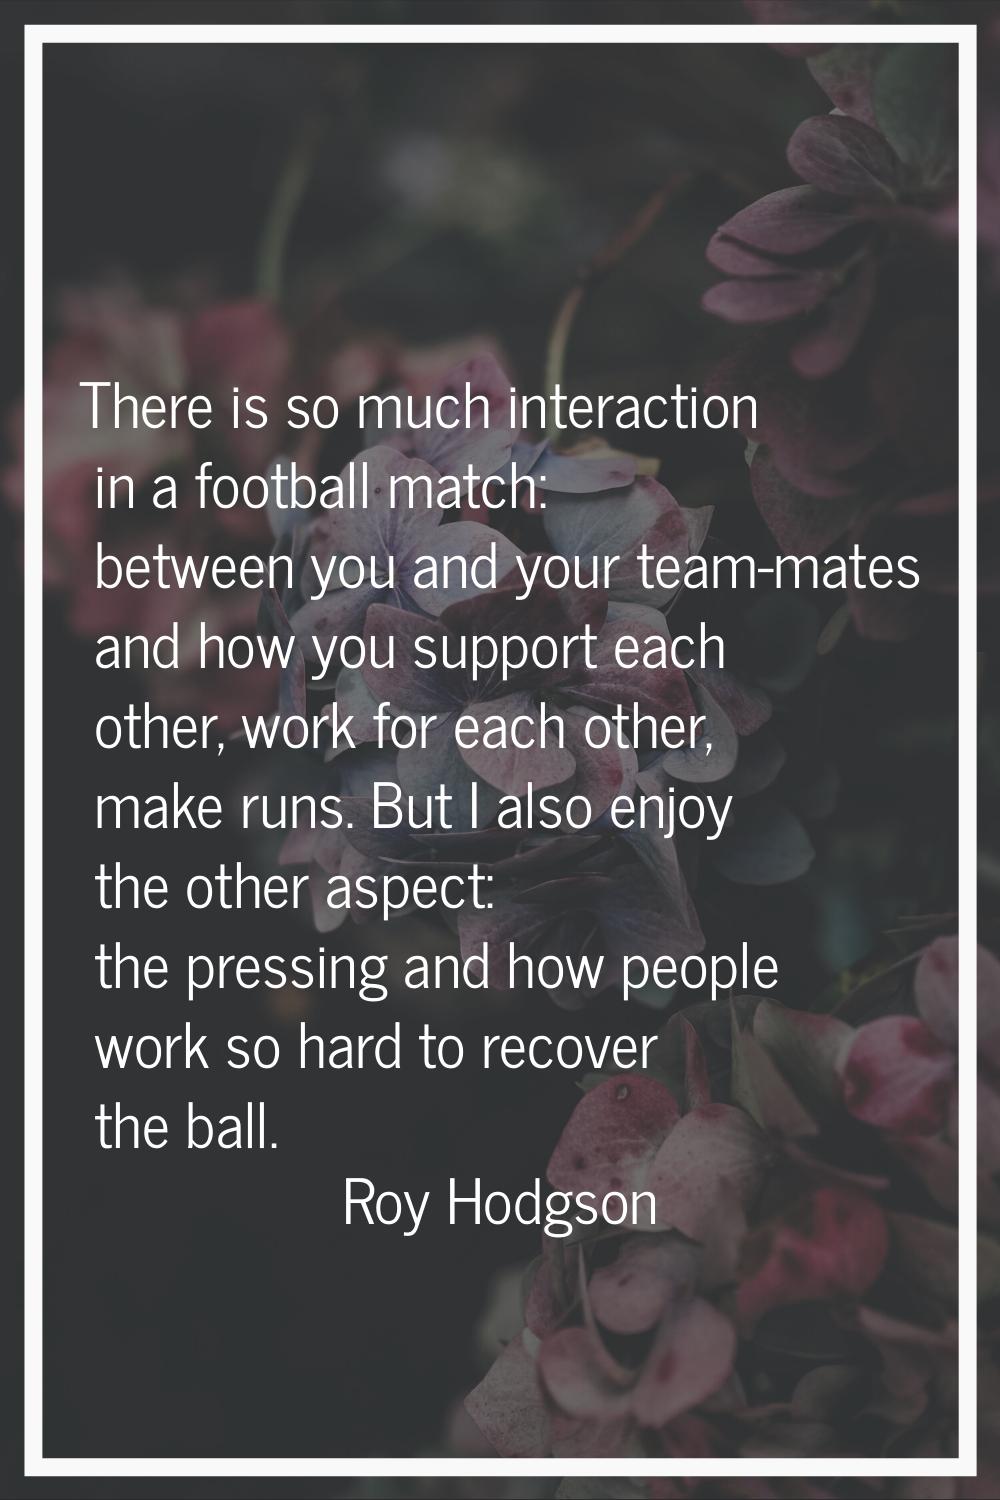 There is so much interaction in a football match: between you and your team-mates and how you suppo